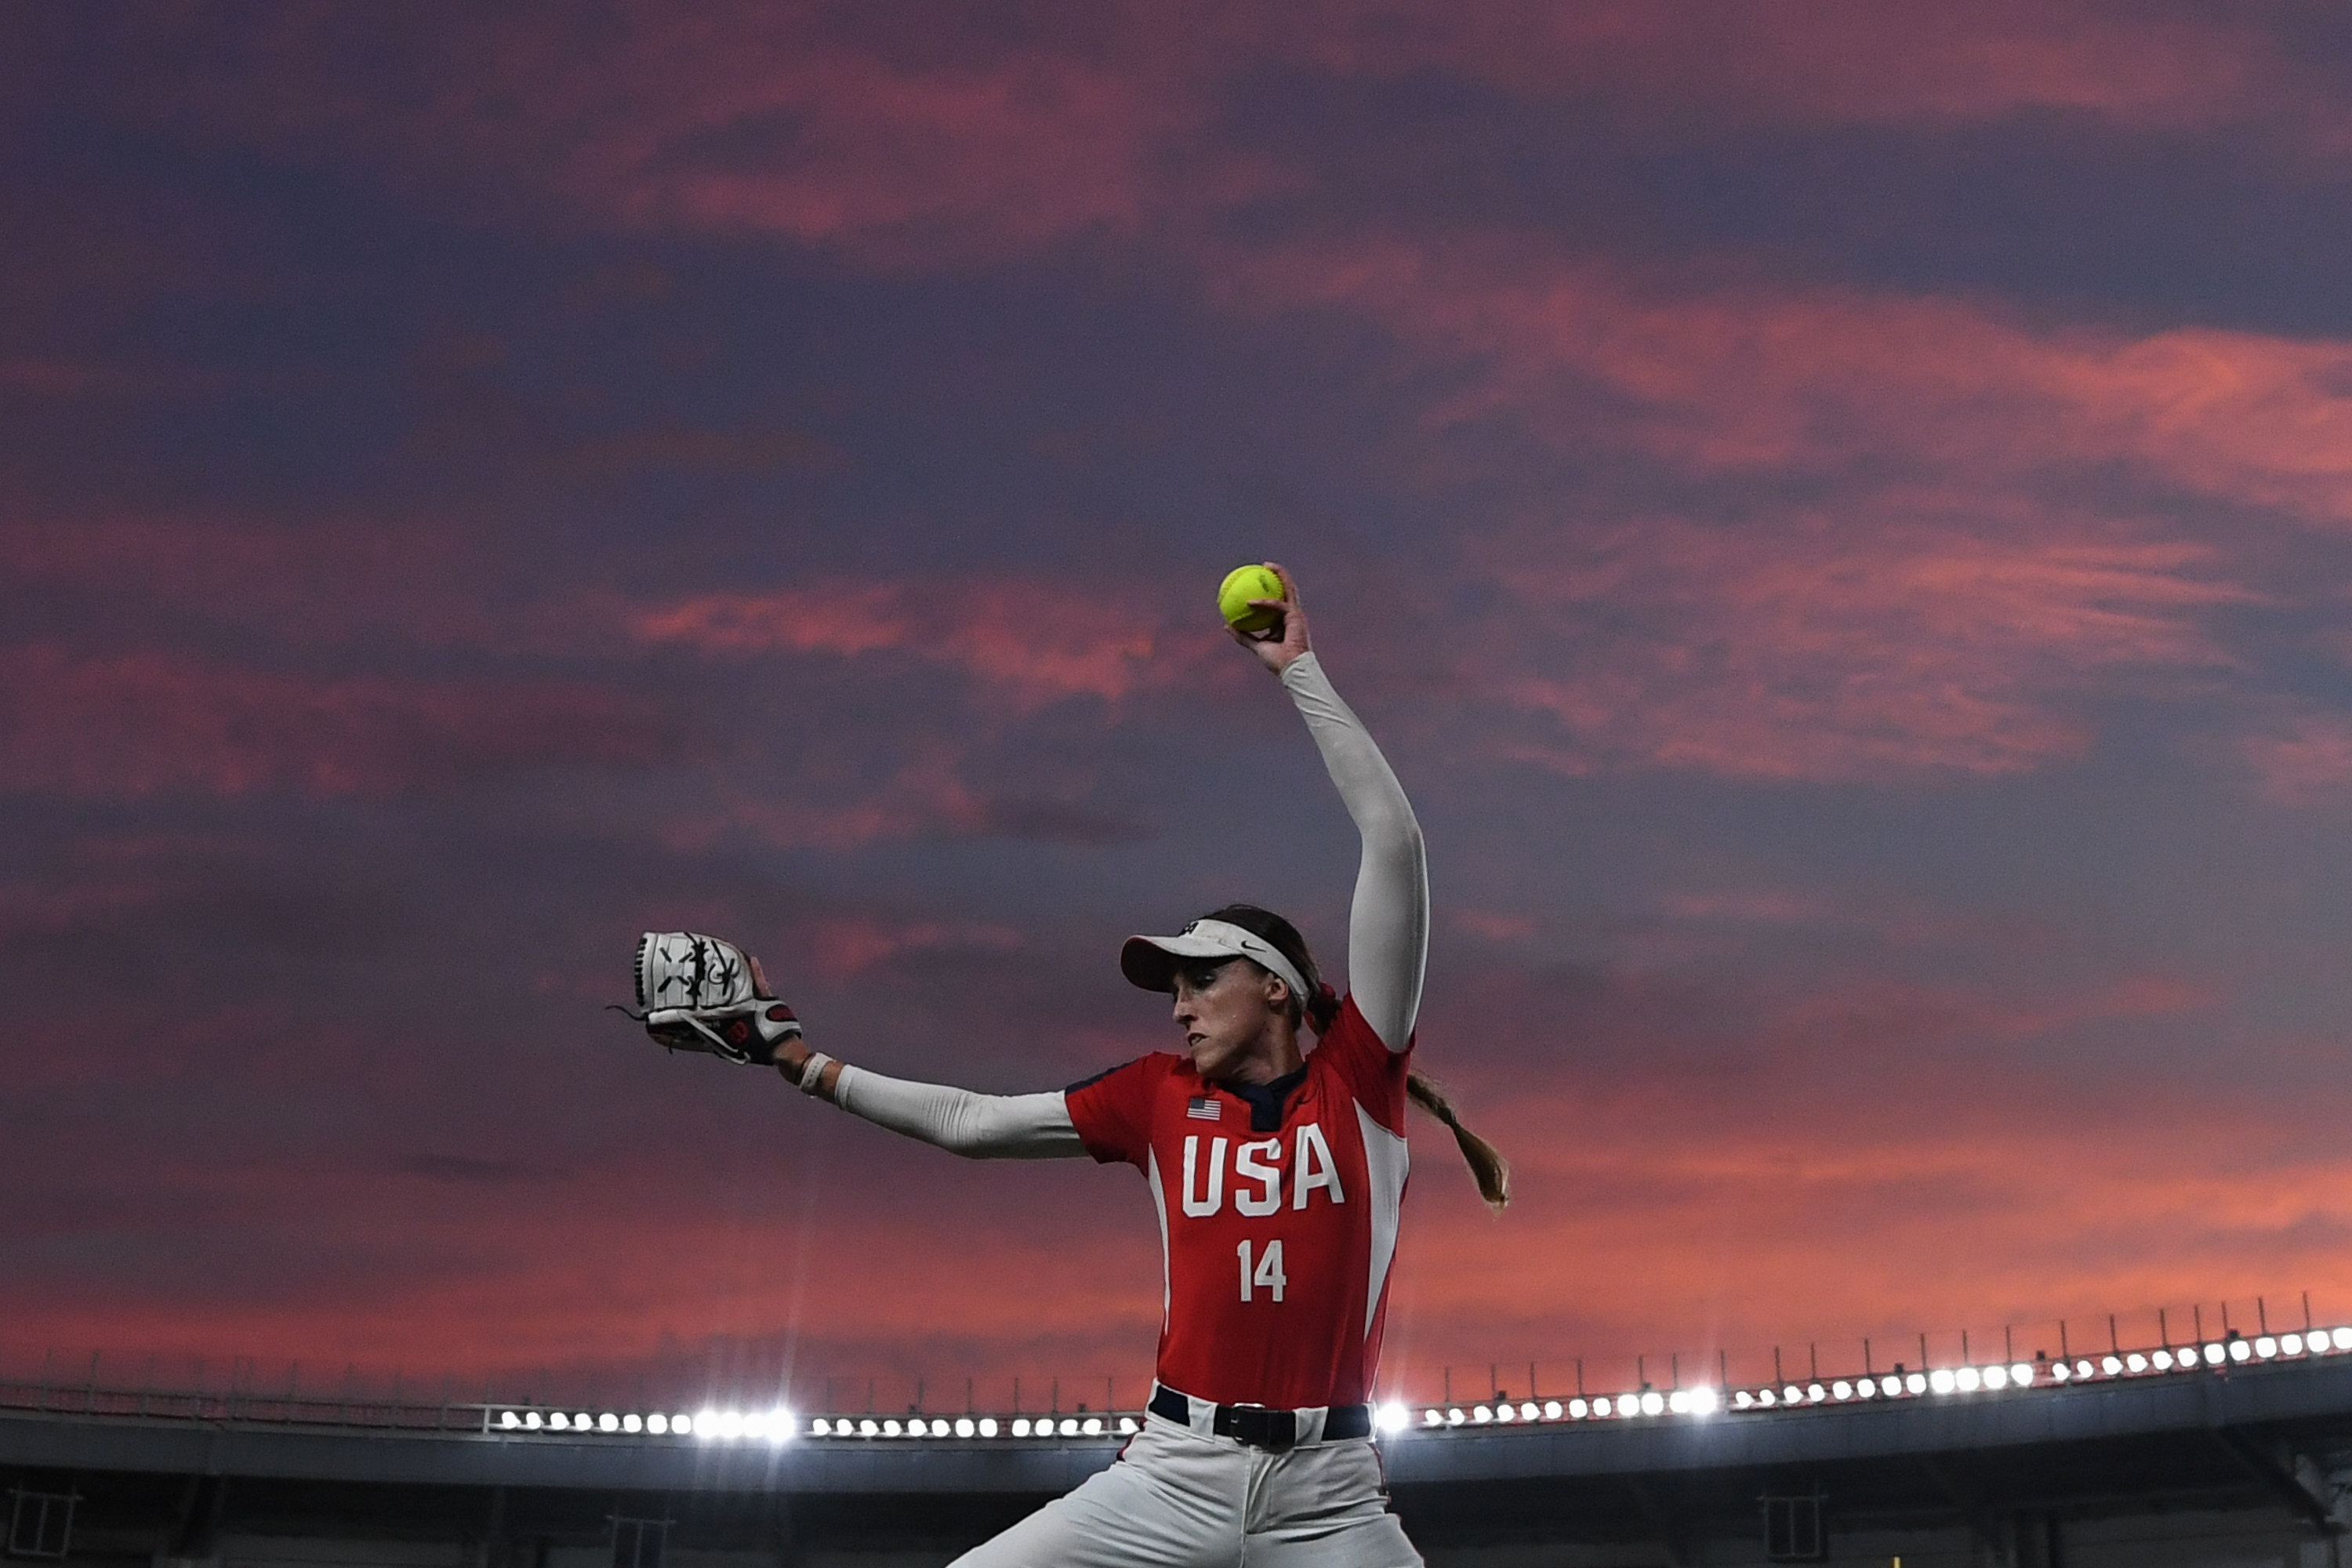 Monica Cecilia Abbott #14 of the USA warms up prior to a match between Japan and United States at the WBSC Women's Softball World Championship, 11 August 2018, in Chiba, Japan.